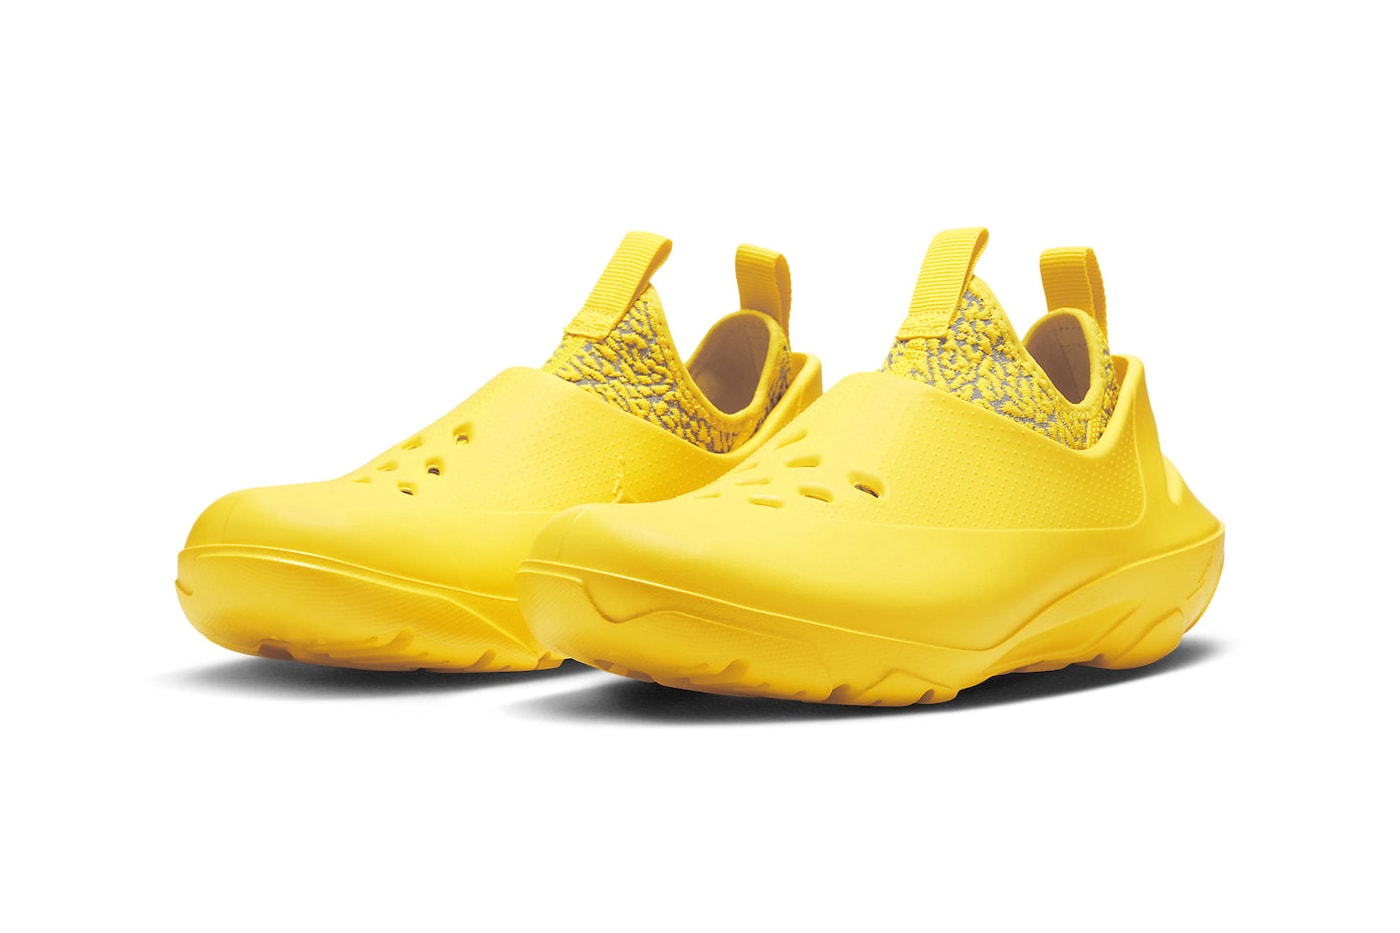 Jordan System.23 "Yellow" Is Bold and Ready for the Summer bright canary yellow clogs water shoes DN4890-701 release info jordan brand nike michael jordan